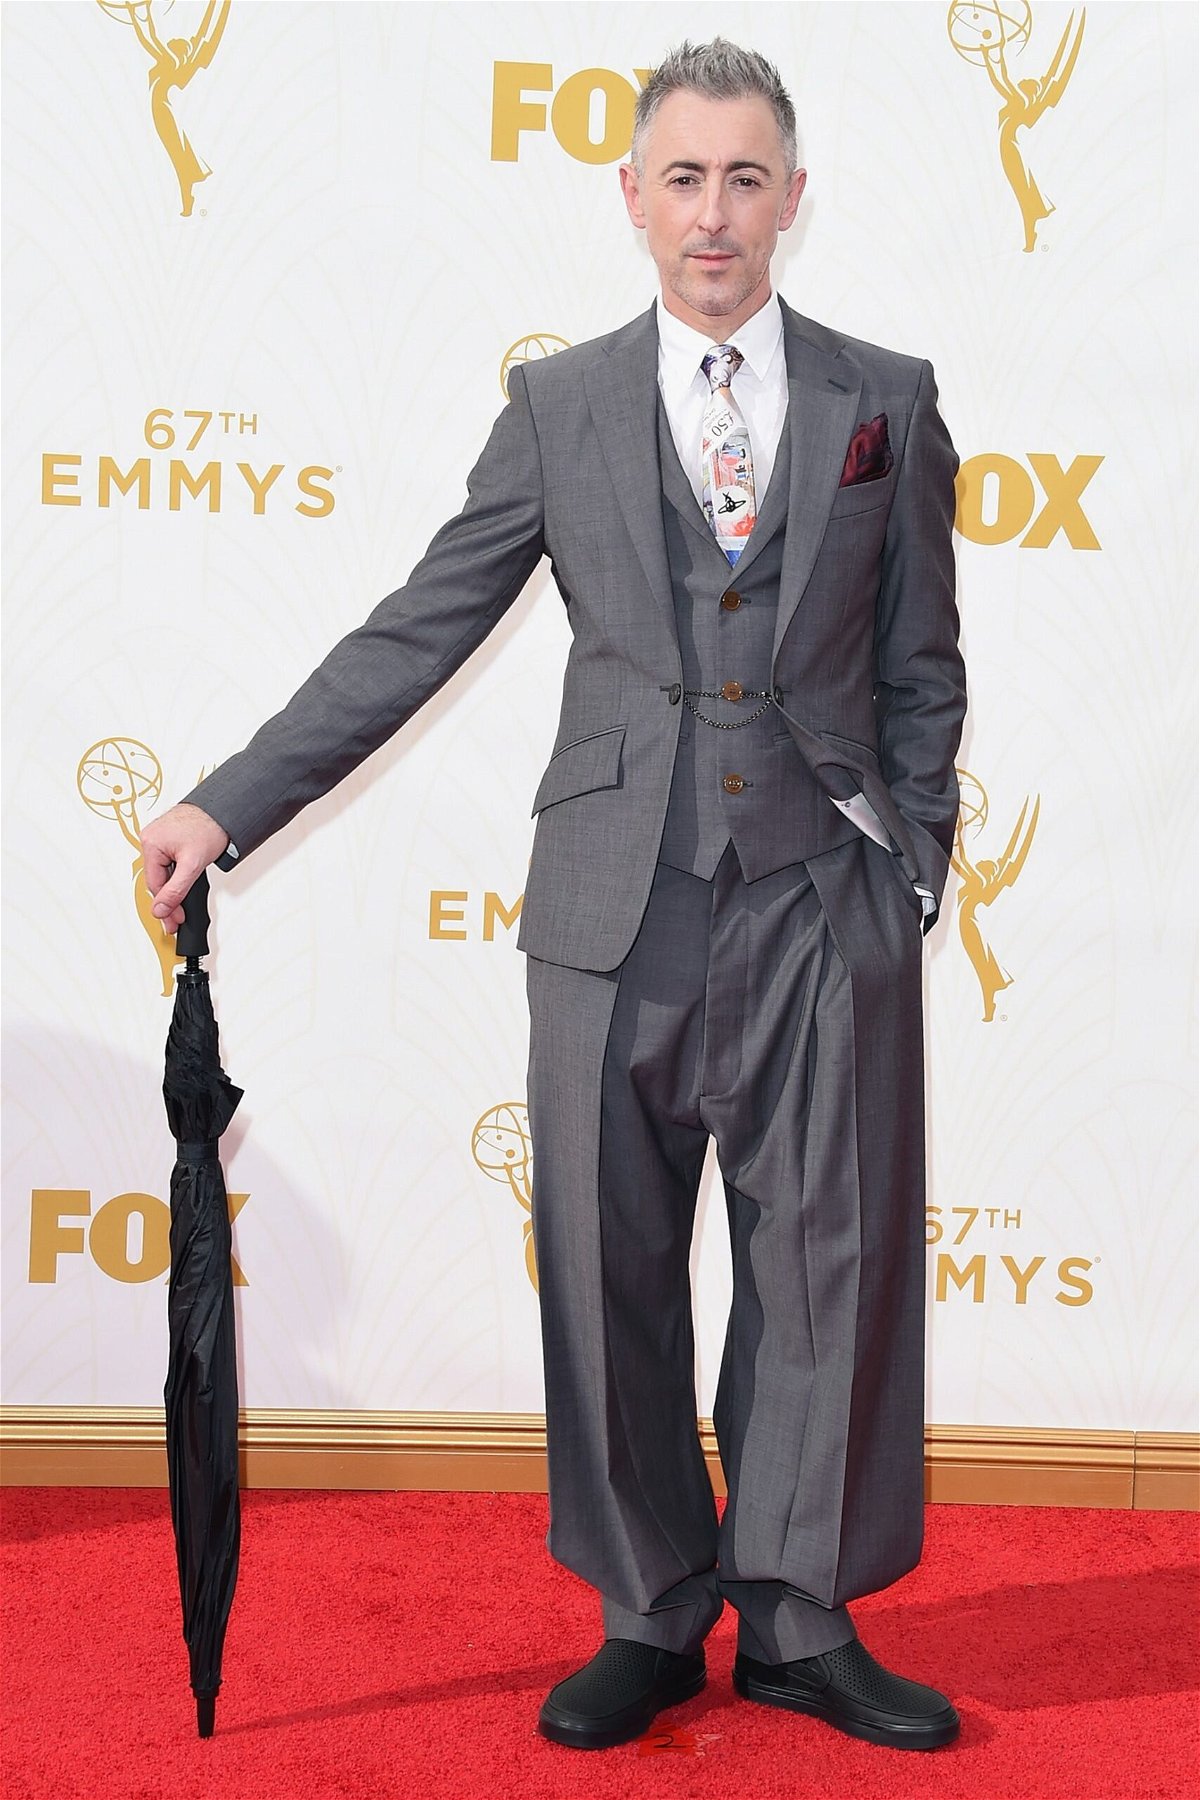 <i>Jason Merritt/Getty Images via CNN Newsource</i><br/>Alan Cumming attends the 67th Primetime Emmy Awards in a Vivienne Westwood suit and black Crocs.